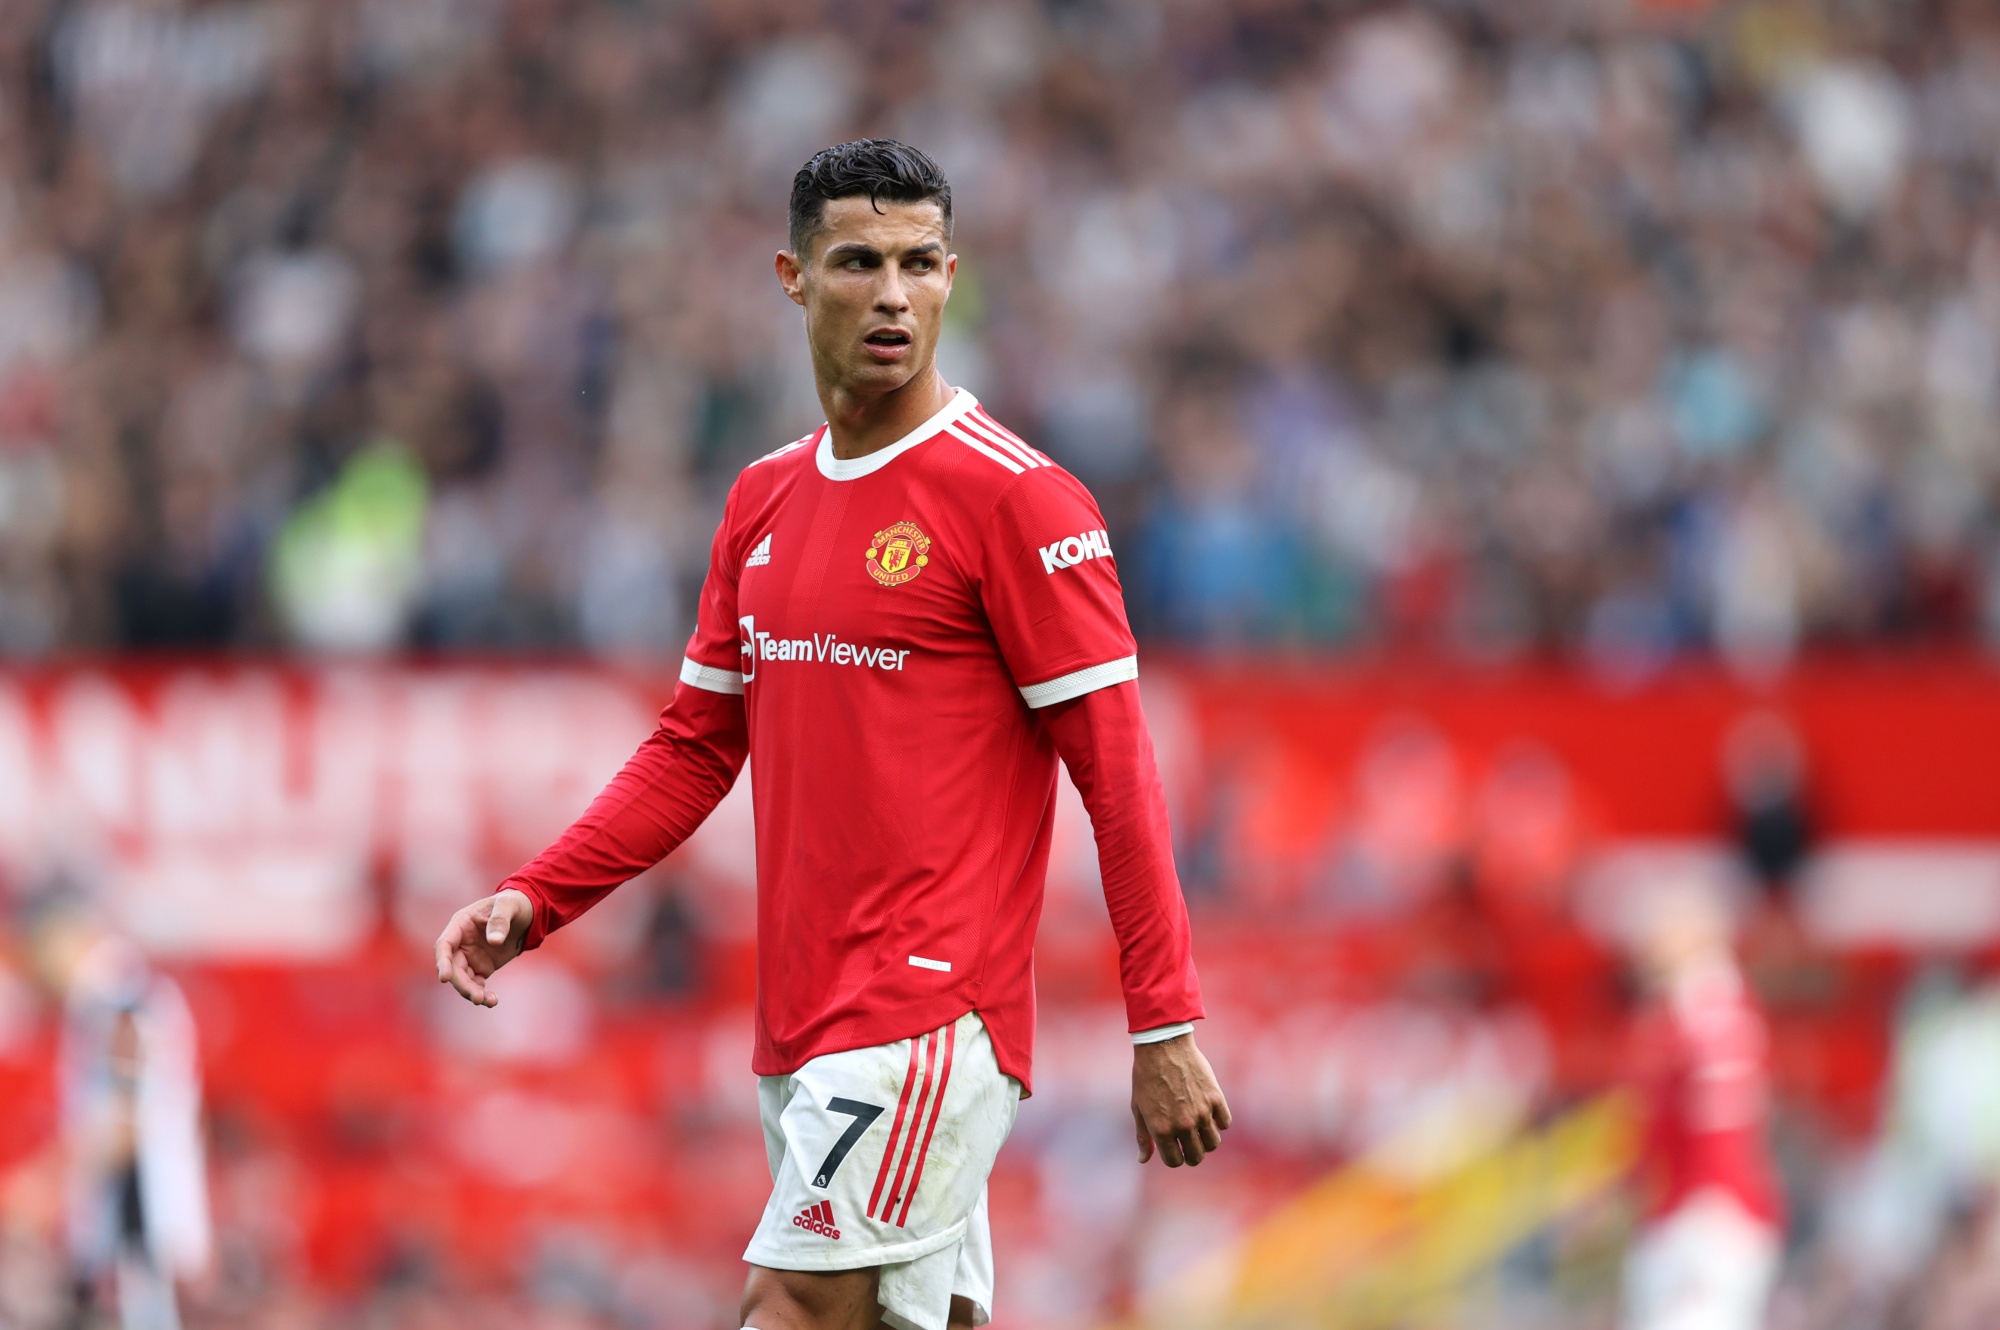 Cristiano Ronaldo's substitute strop shows football needs to